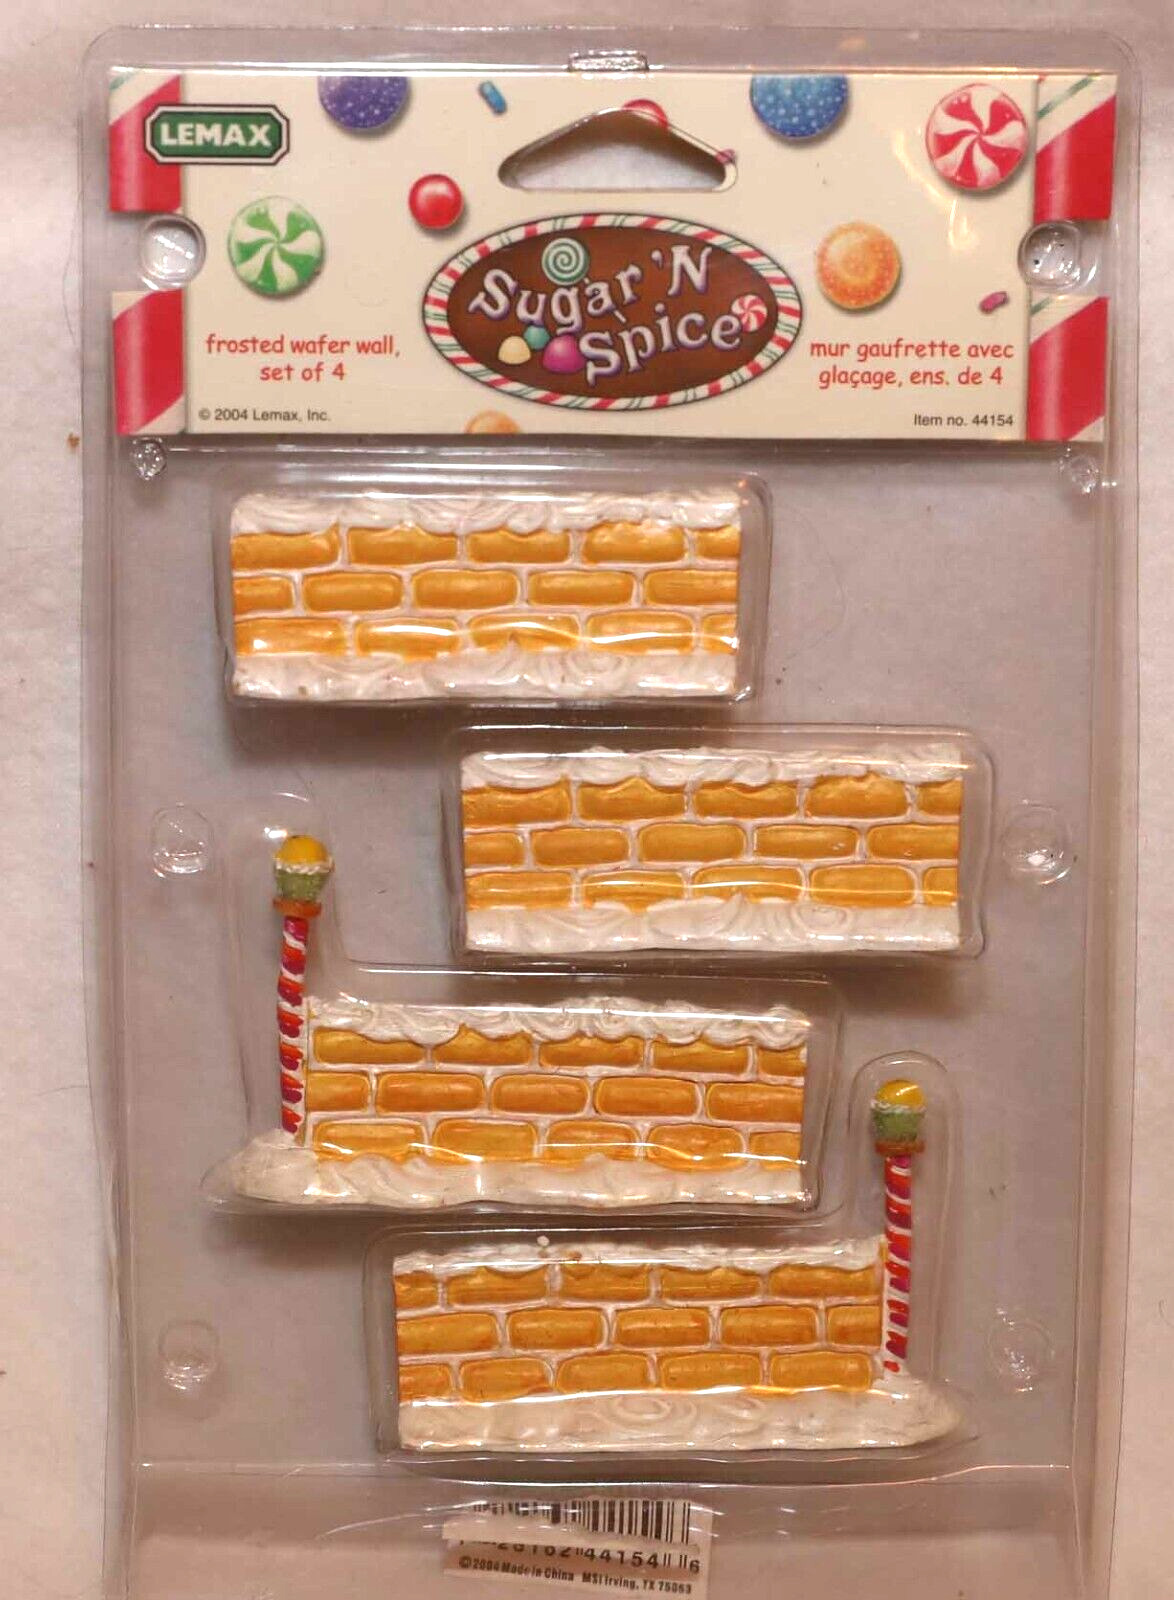 LEMAX SUGAR N SPICE FROSTED WAFER WALL SET OF 4 ACCESSORIES 44154 CHRISTMAS